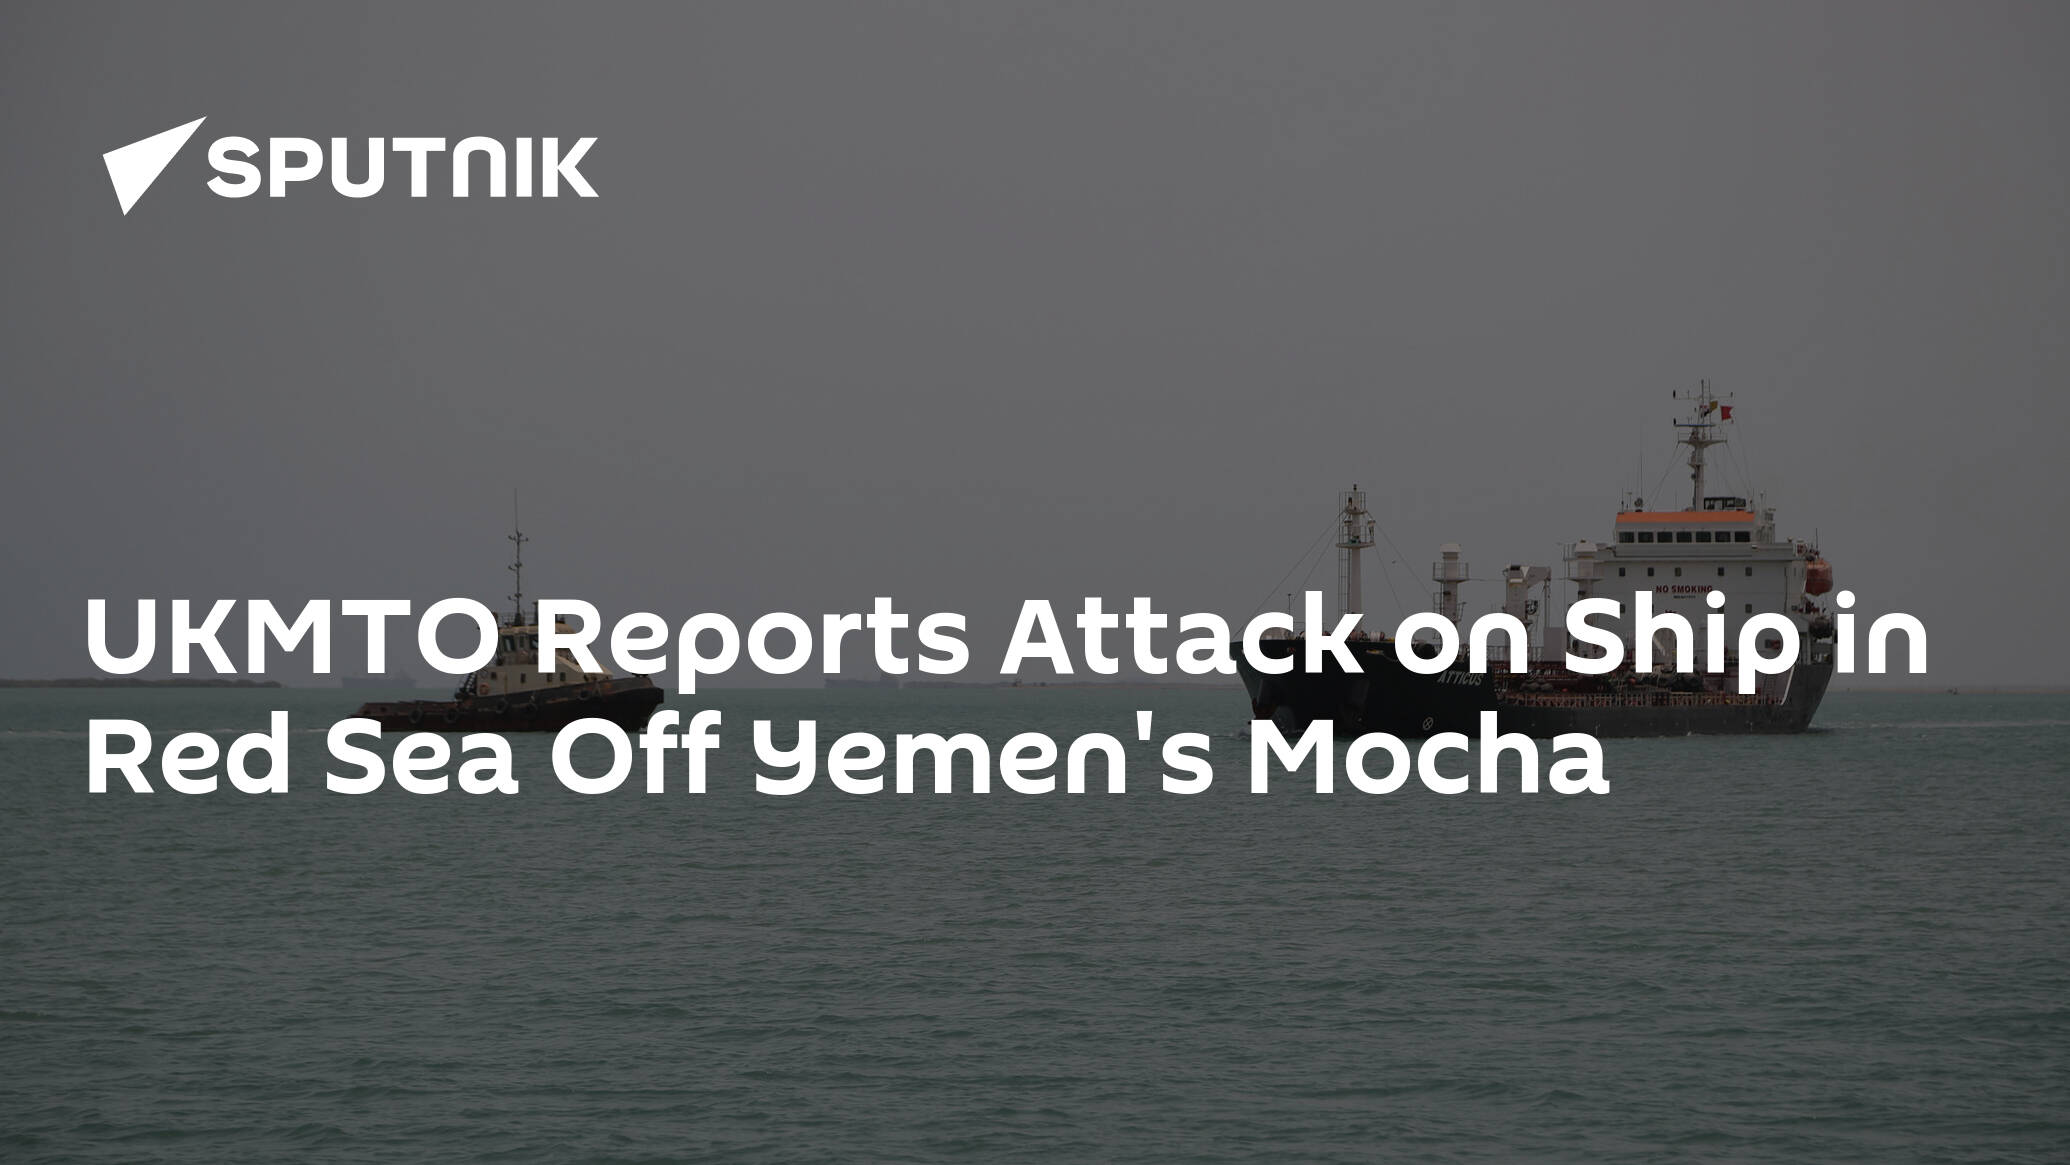 UKMTO Reports Attack on Ship in Red Sea Off Yemen's Mocha